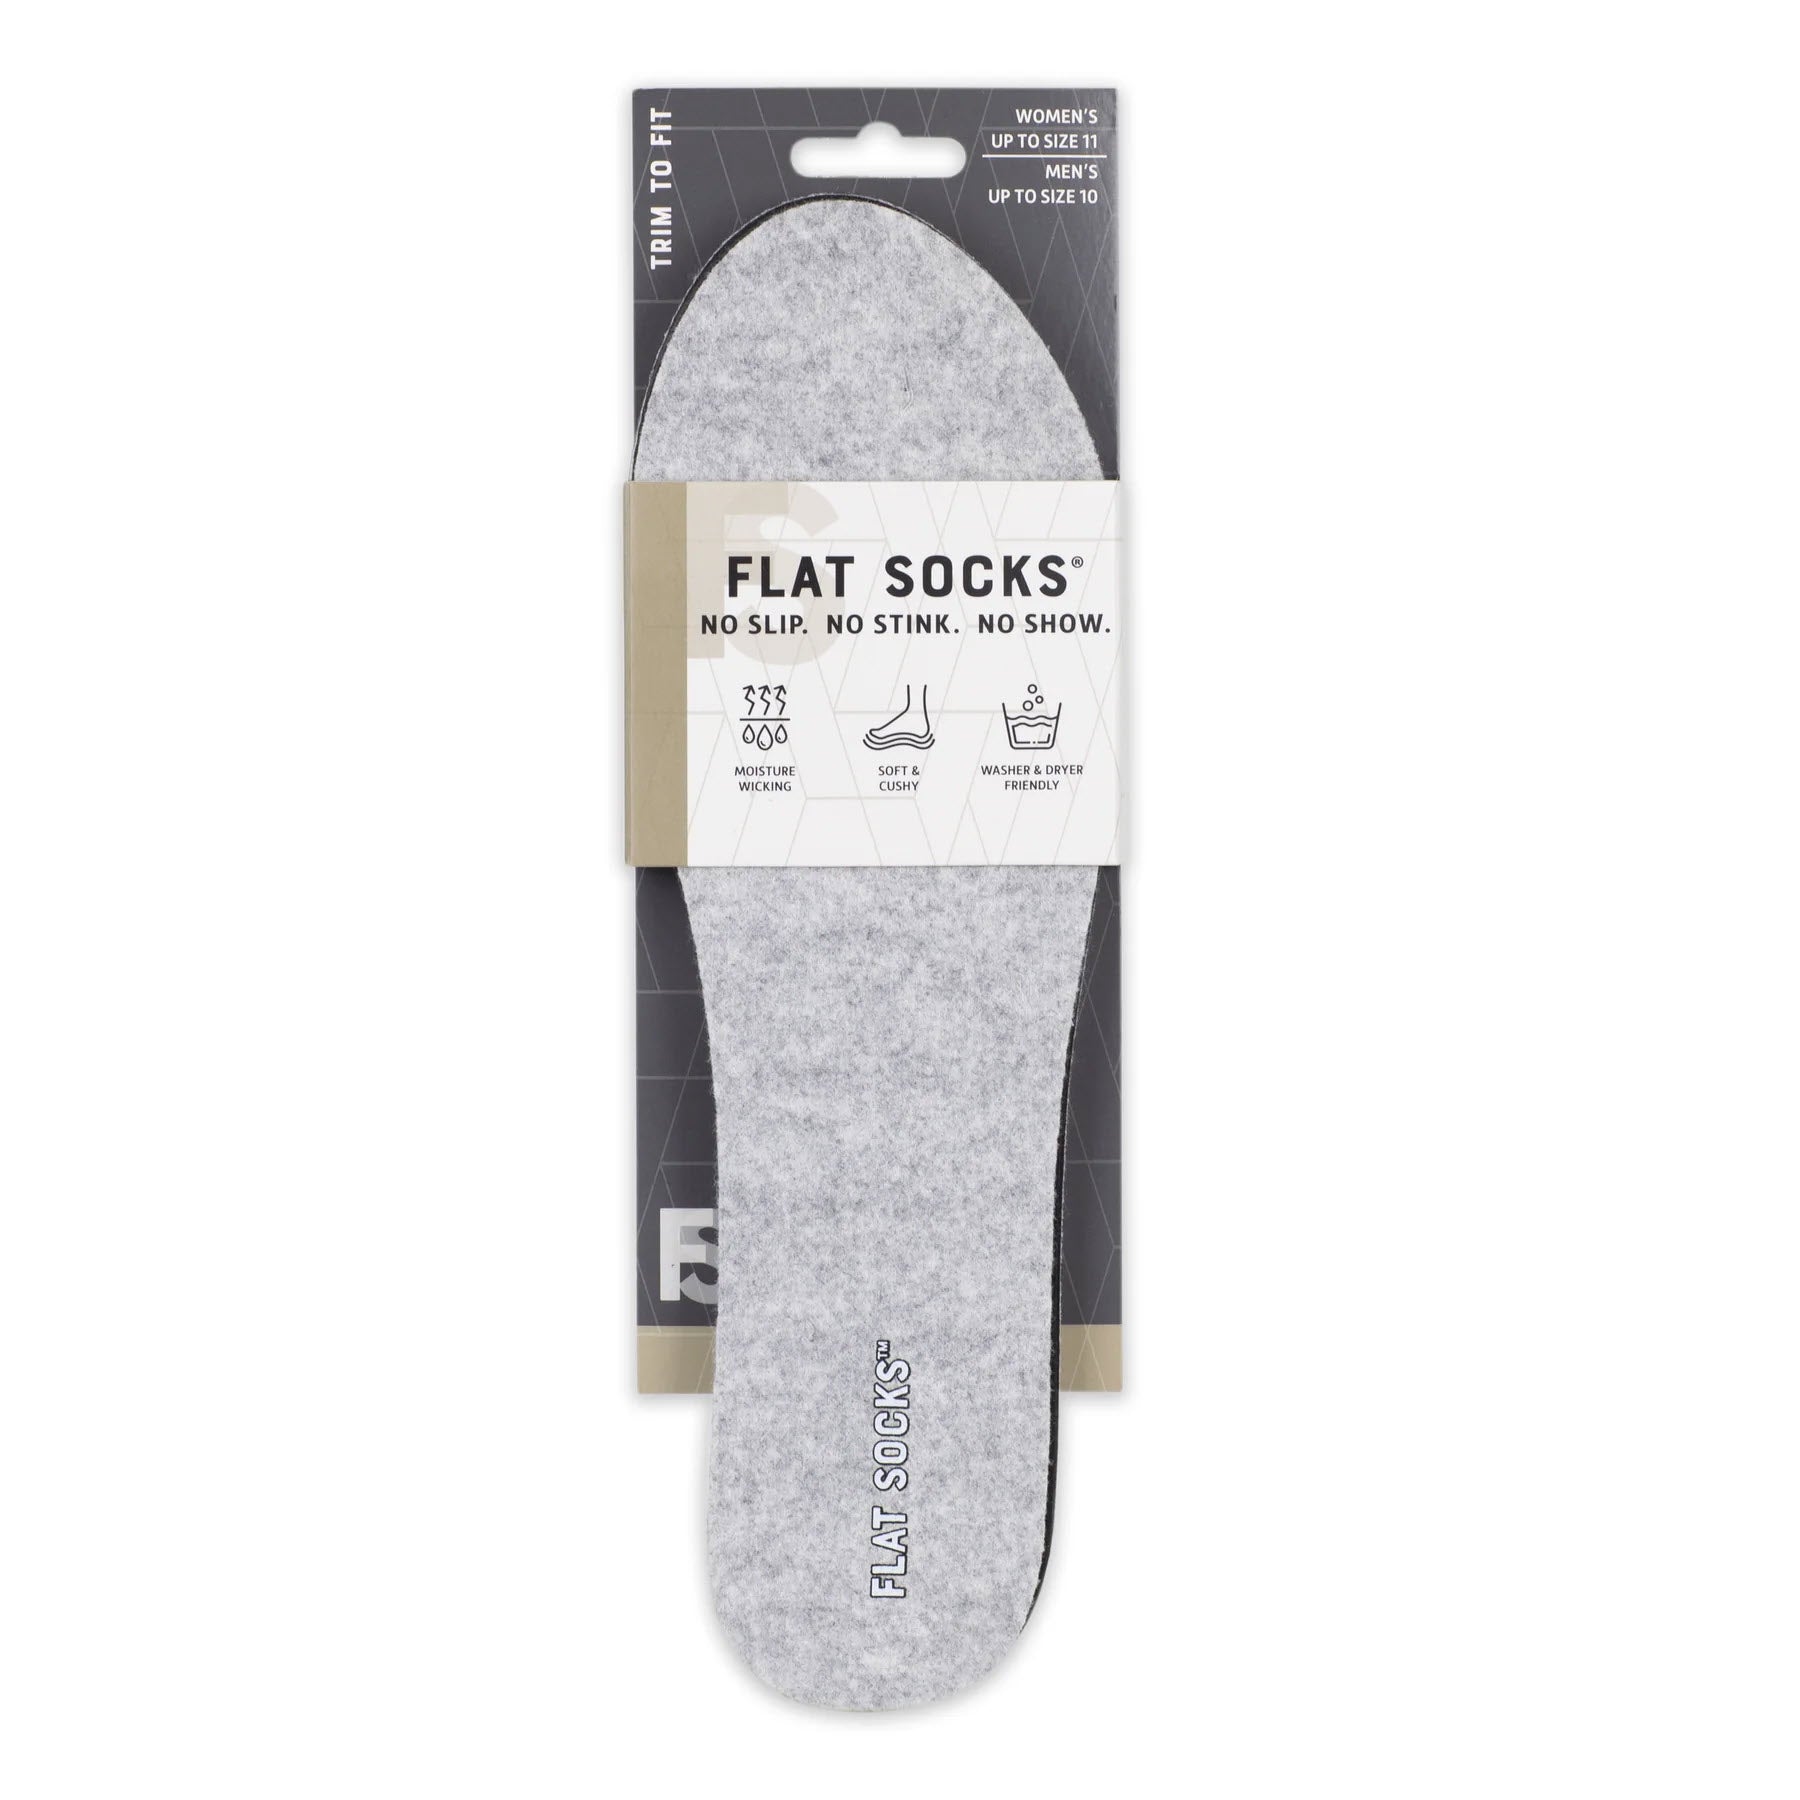 A pair of FLAT SOCKS light gray trim-to-fit socks in packaging, labeled "no slip, no stink, no show," designed for women's shoe sizes 5.5-9.